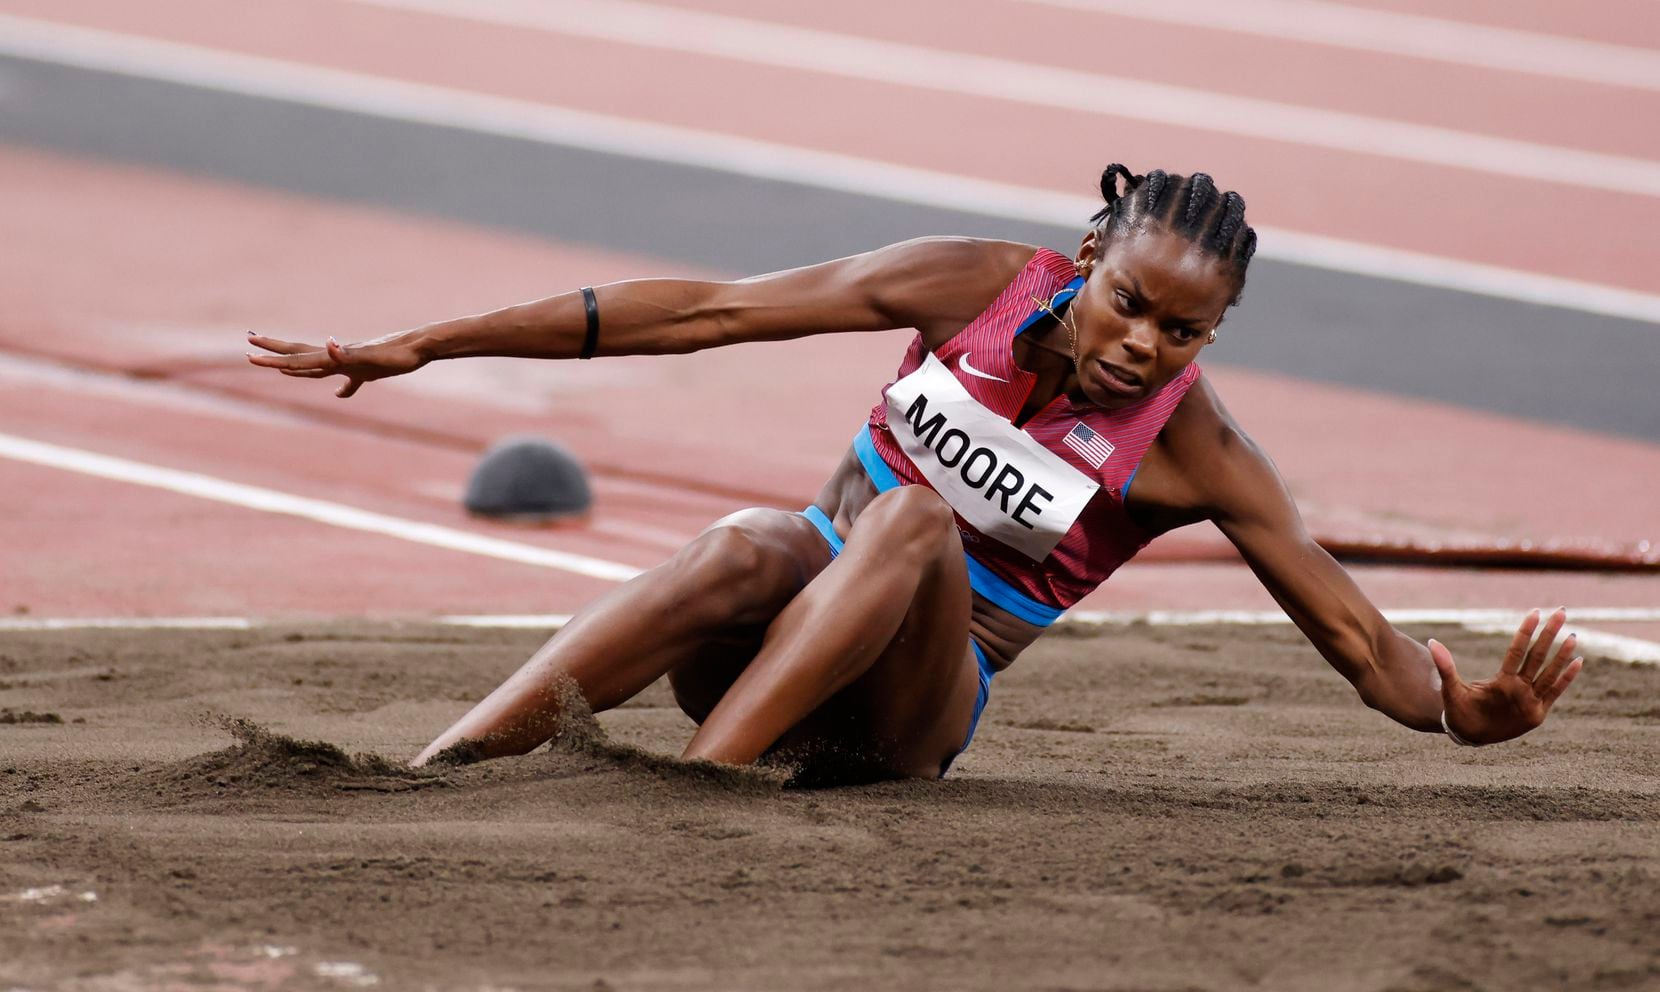 Team USA’s Jasmine Moore competed in the women’s triple jump qualification round in Tokyo.